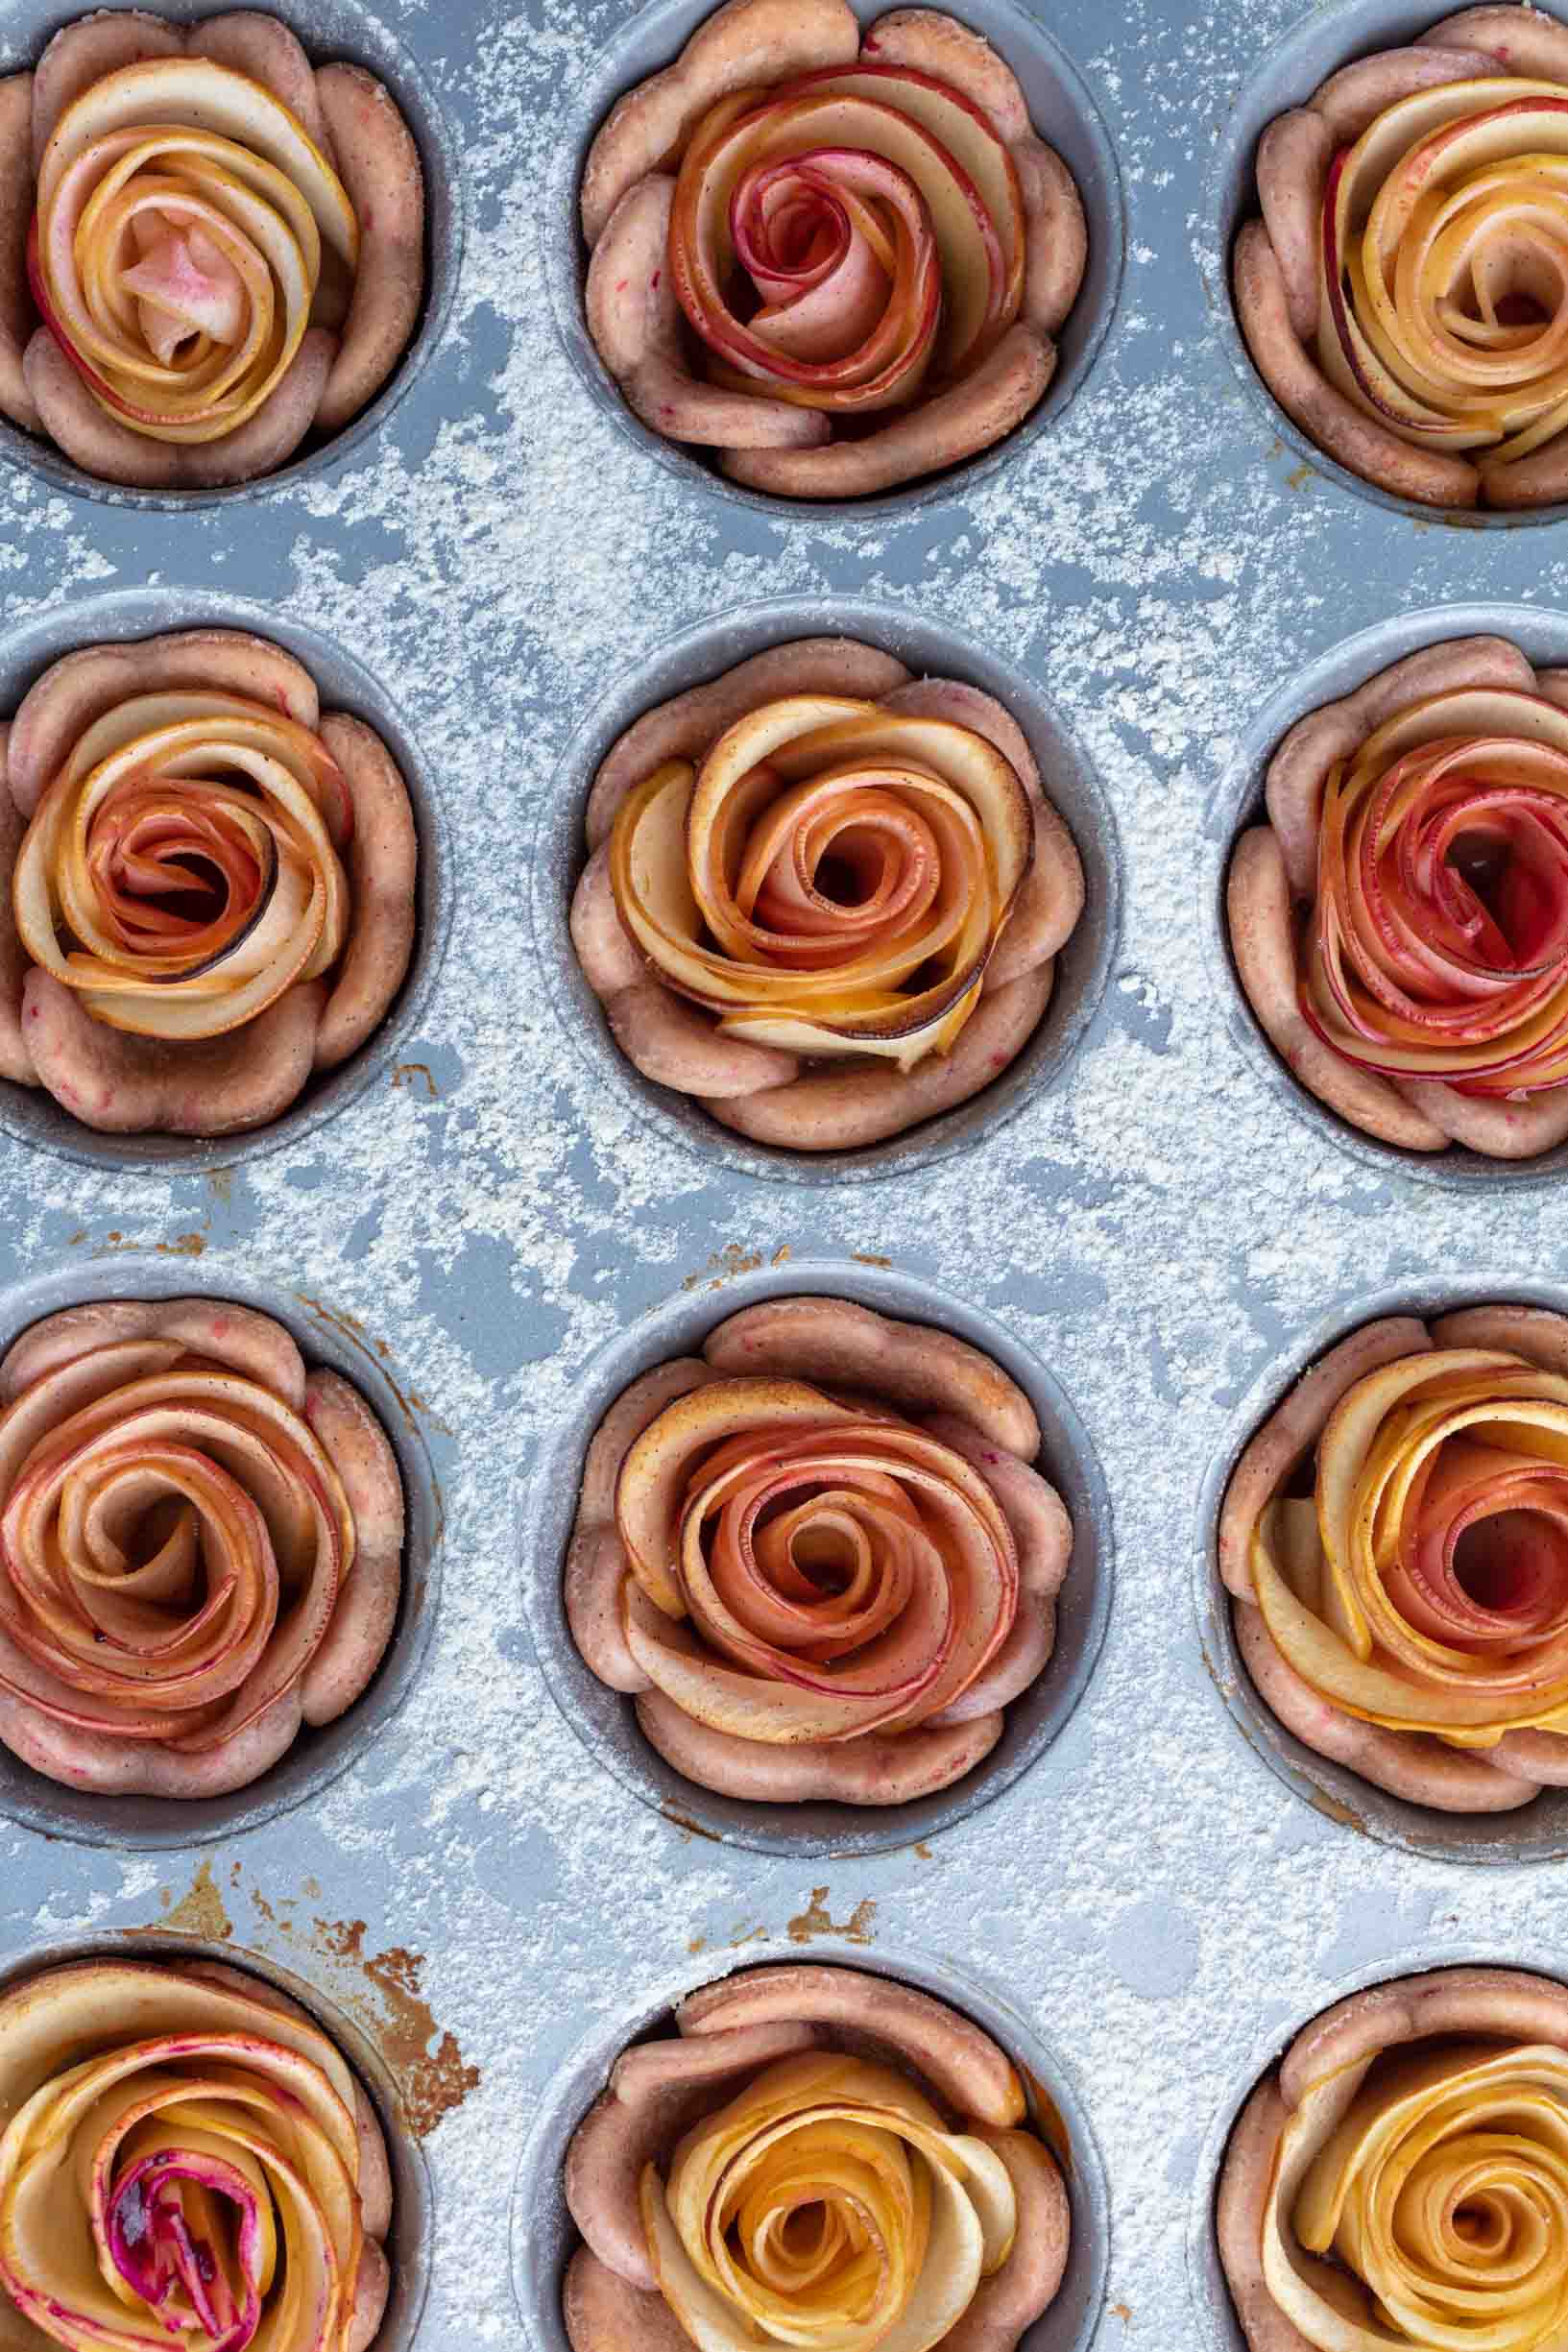 apple pie roses fresh from the oven